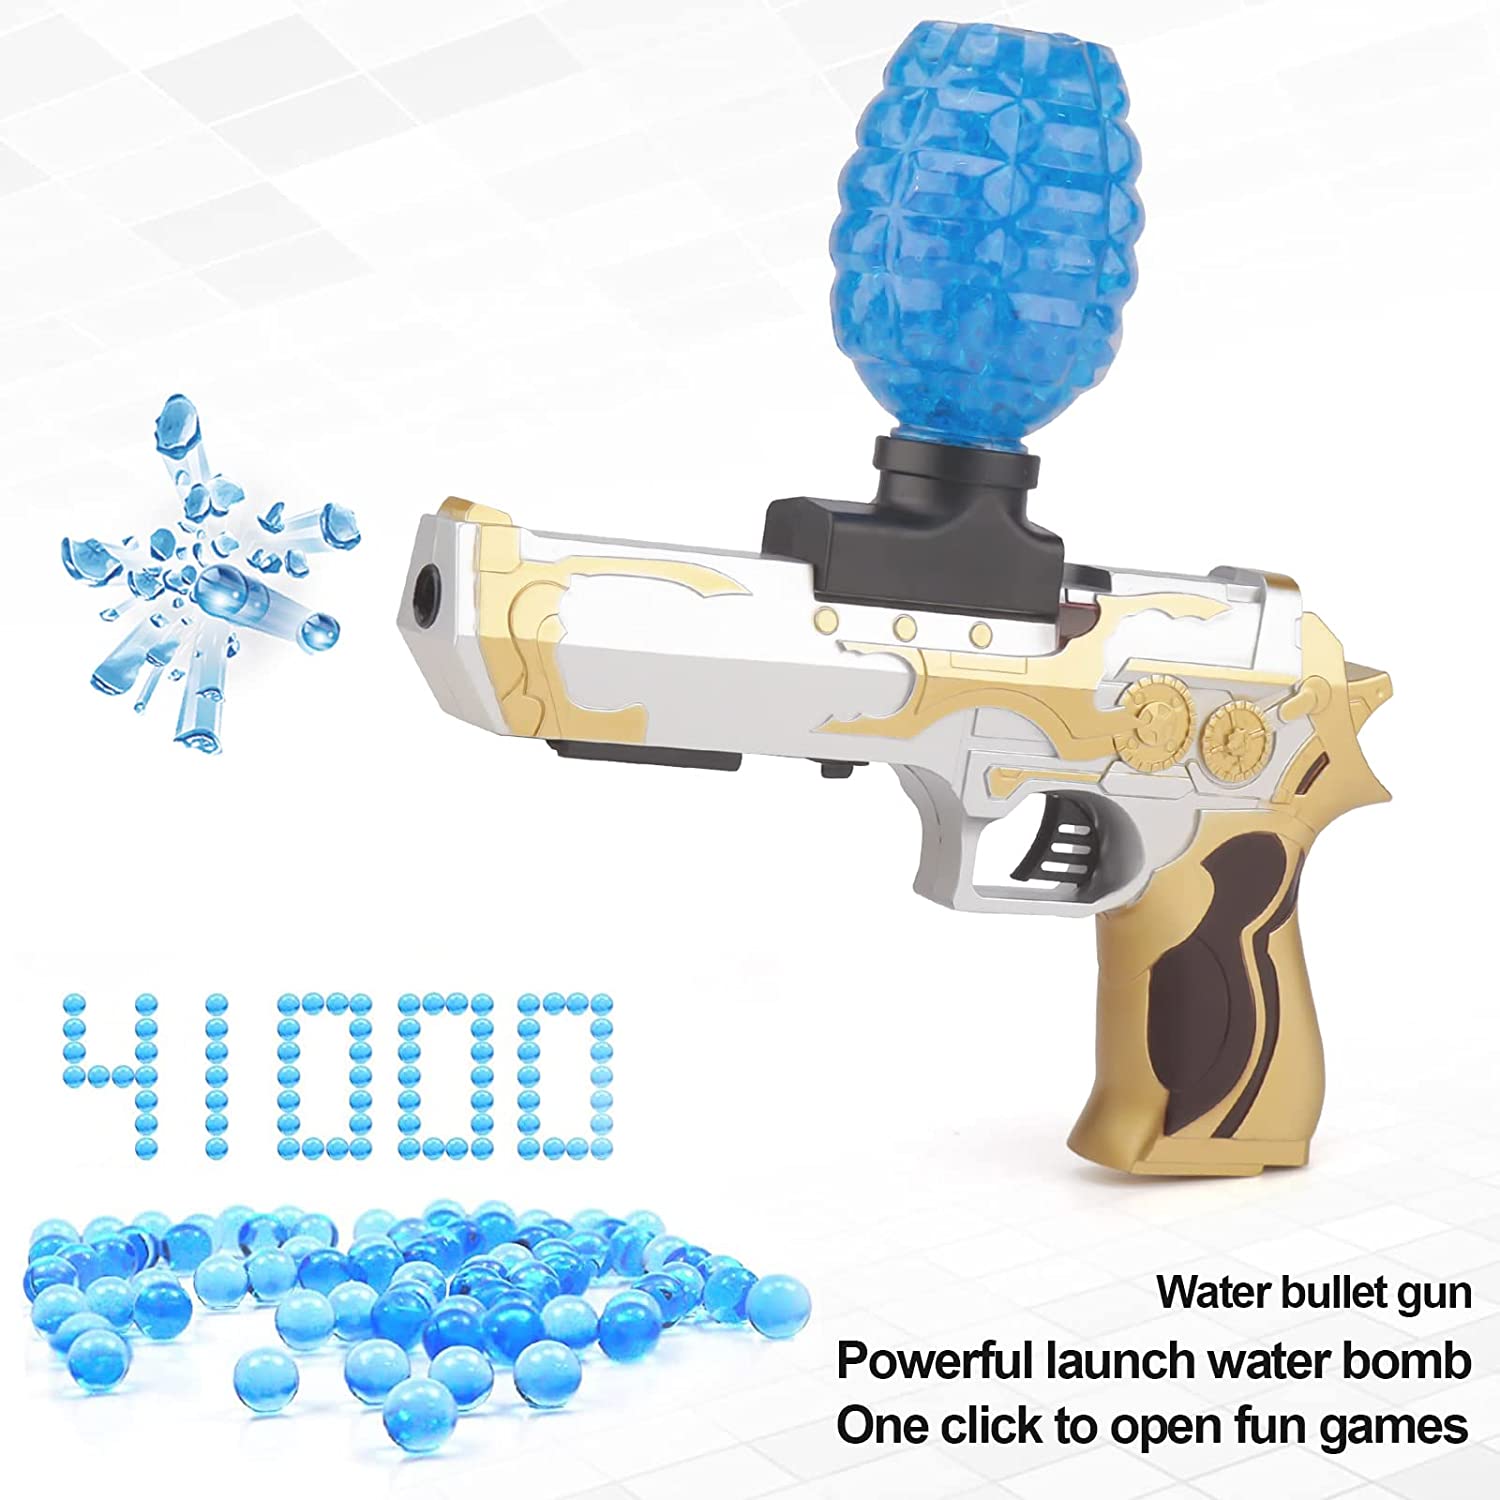 Gel Blaster, Splatter Ball, and Water Beads: Playtime with the 24 Best Orbeez Guns of 2023